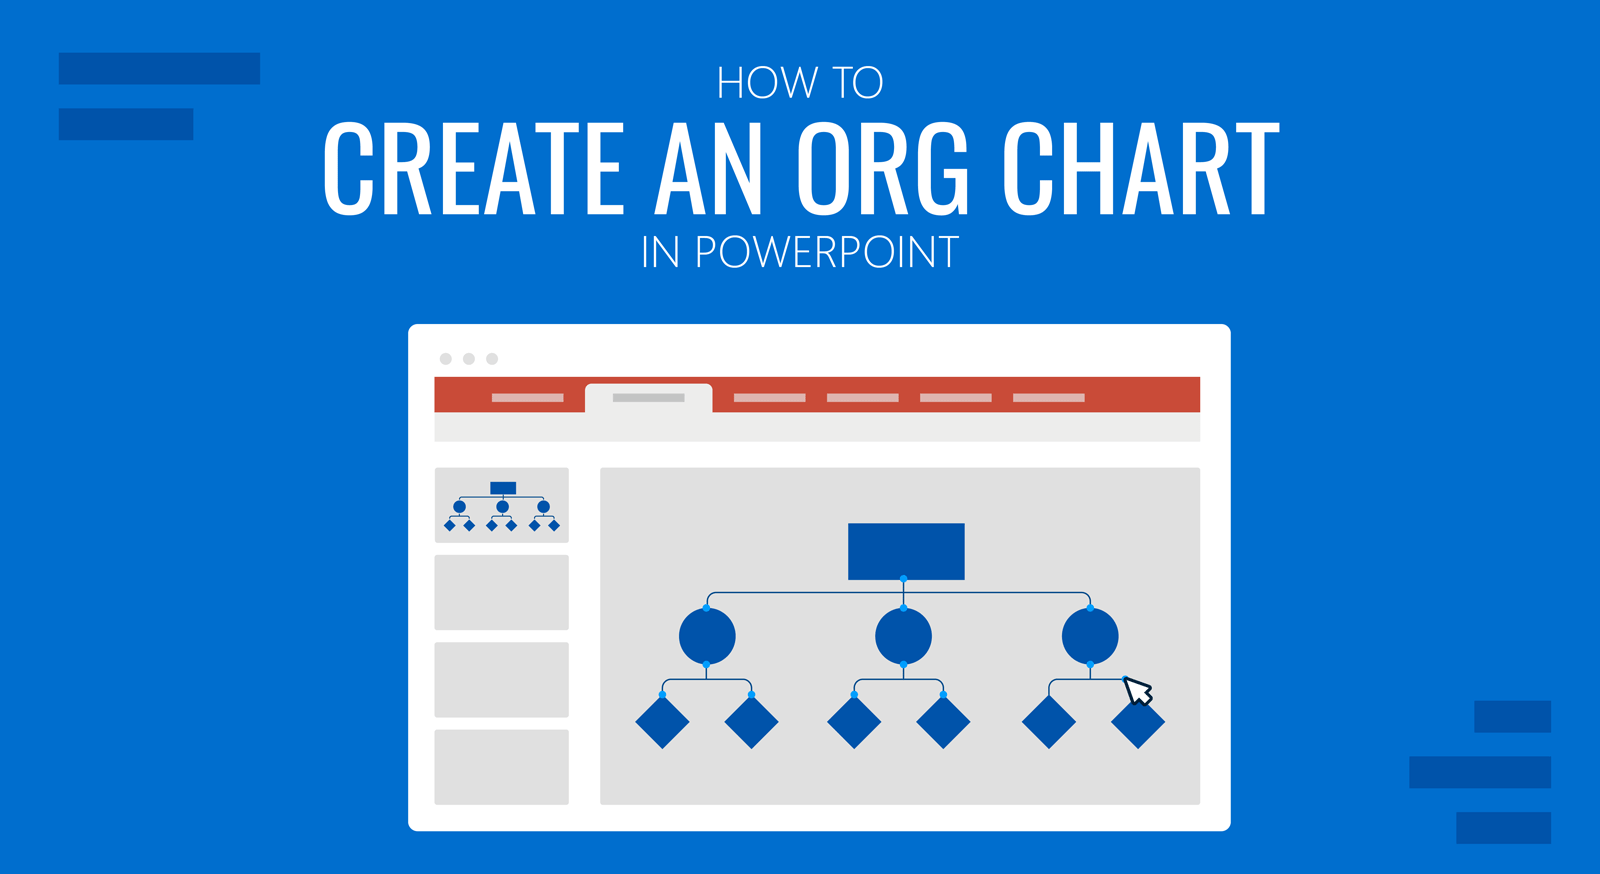 How to create an Org Chart in PowerPoint